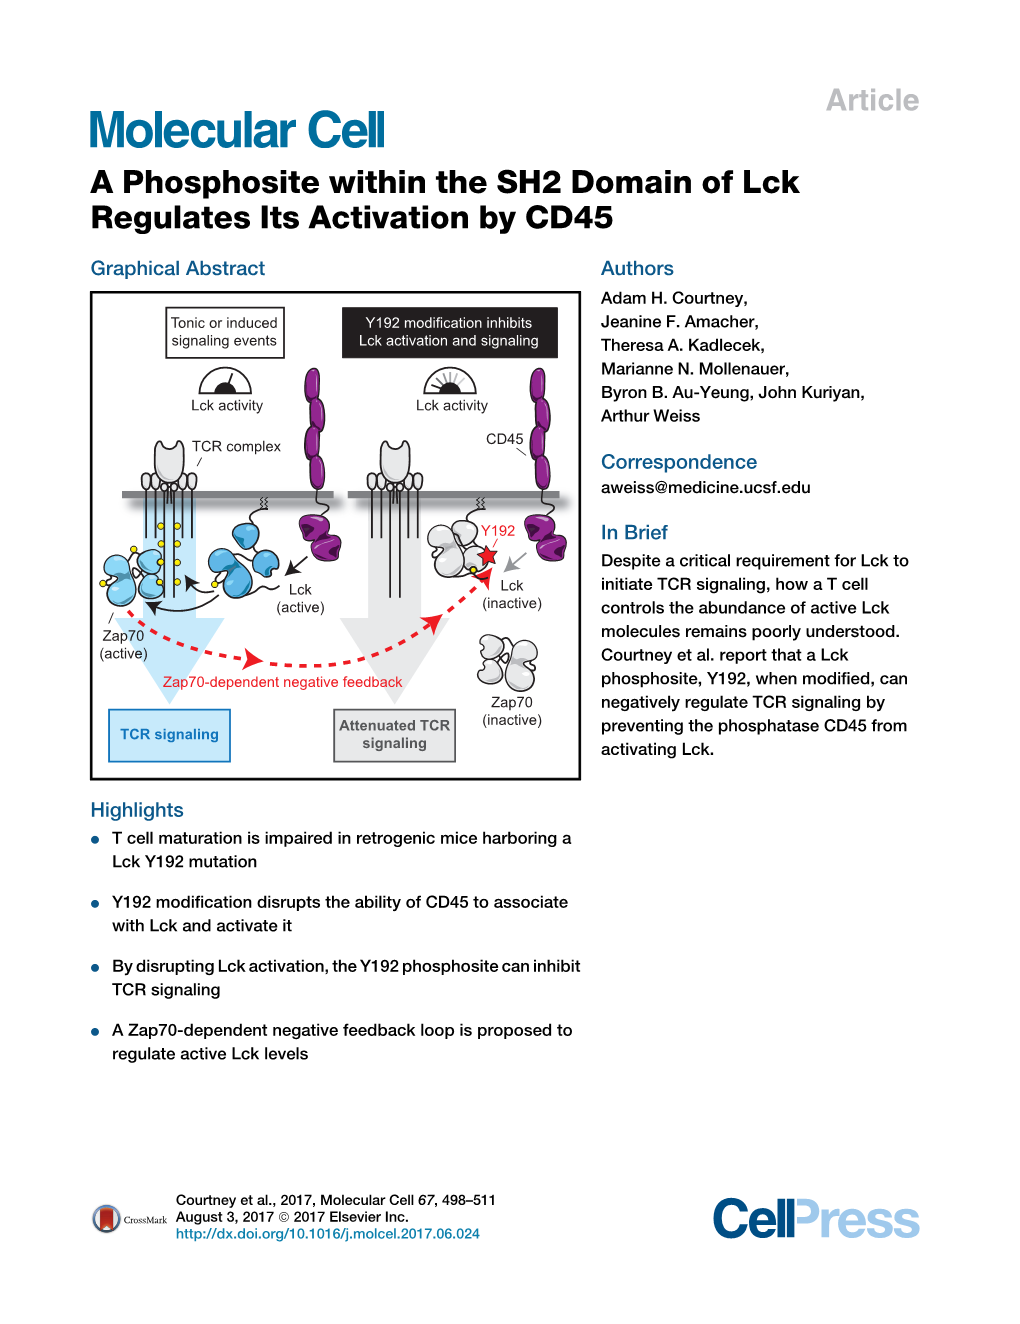 A Phosphosite Within the SH2 Domain of Lck Regulates Its Activation by CD45